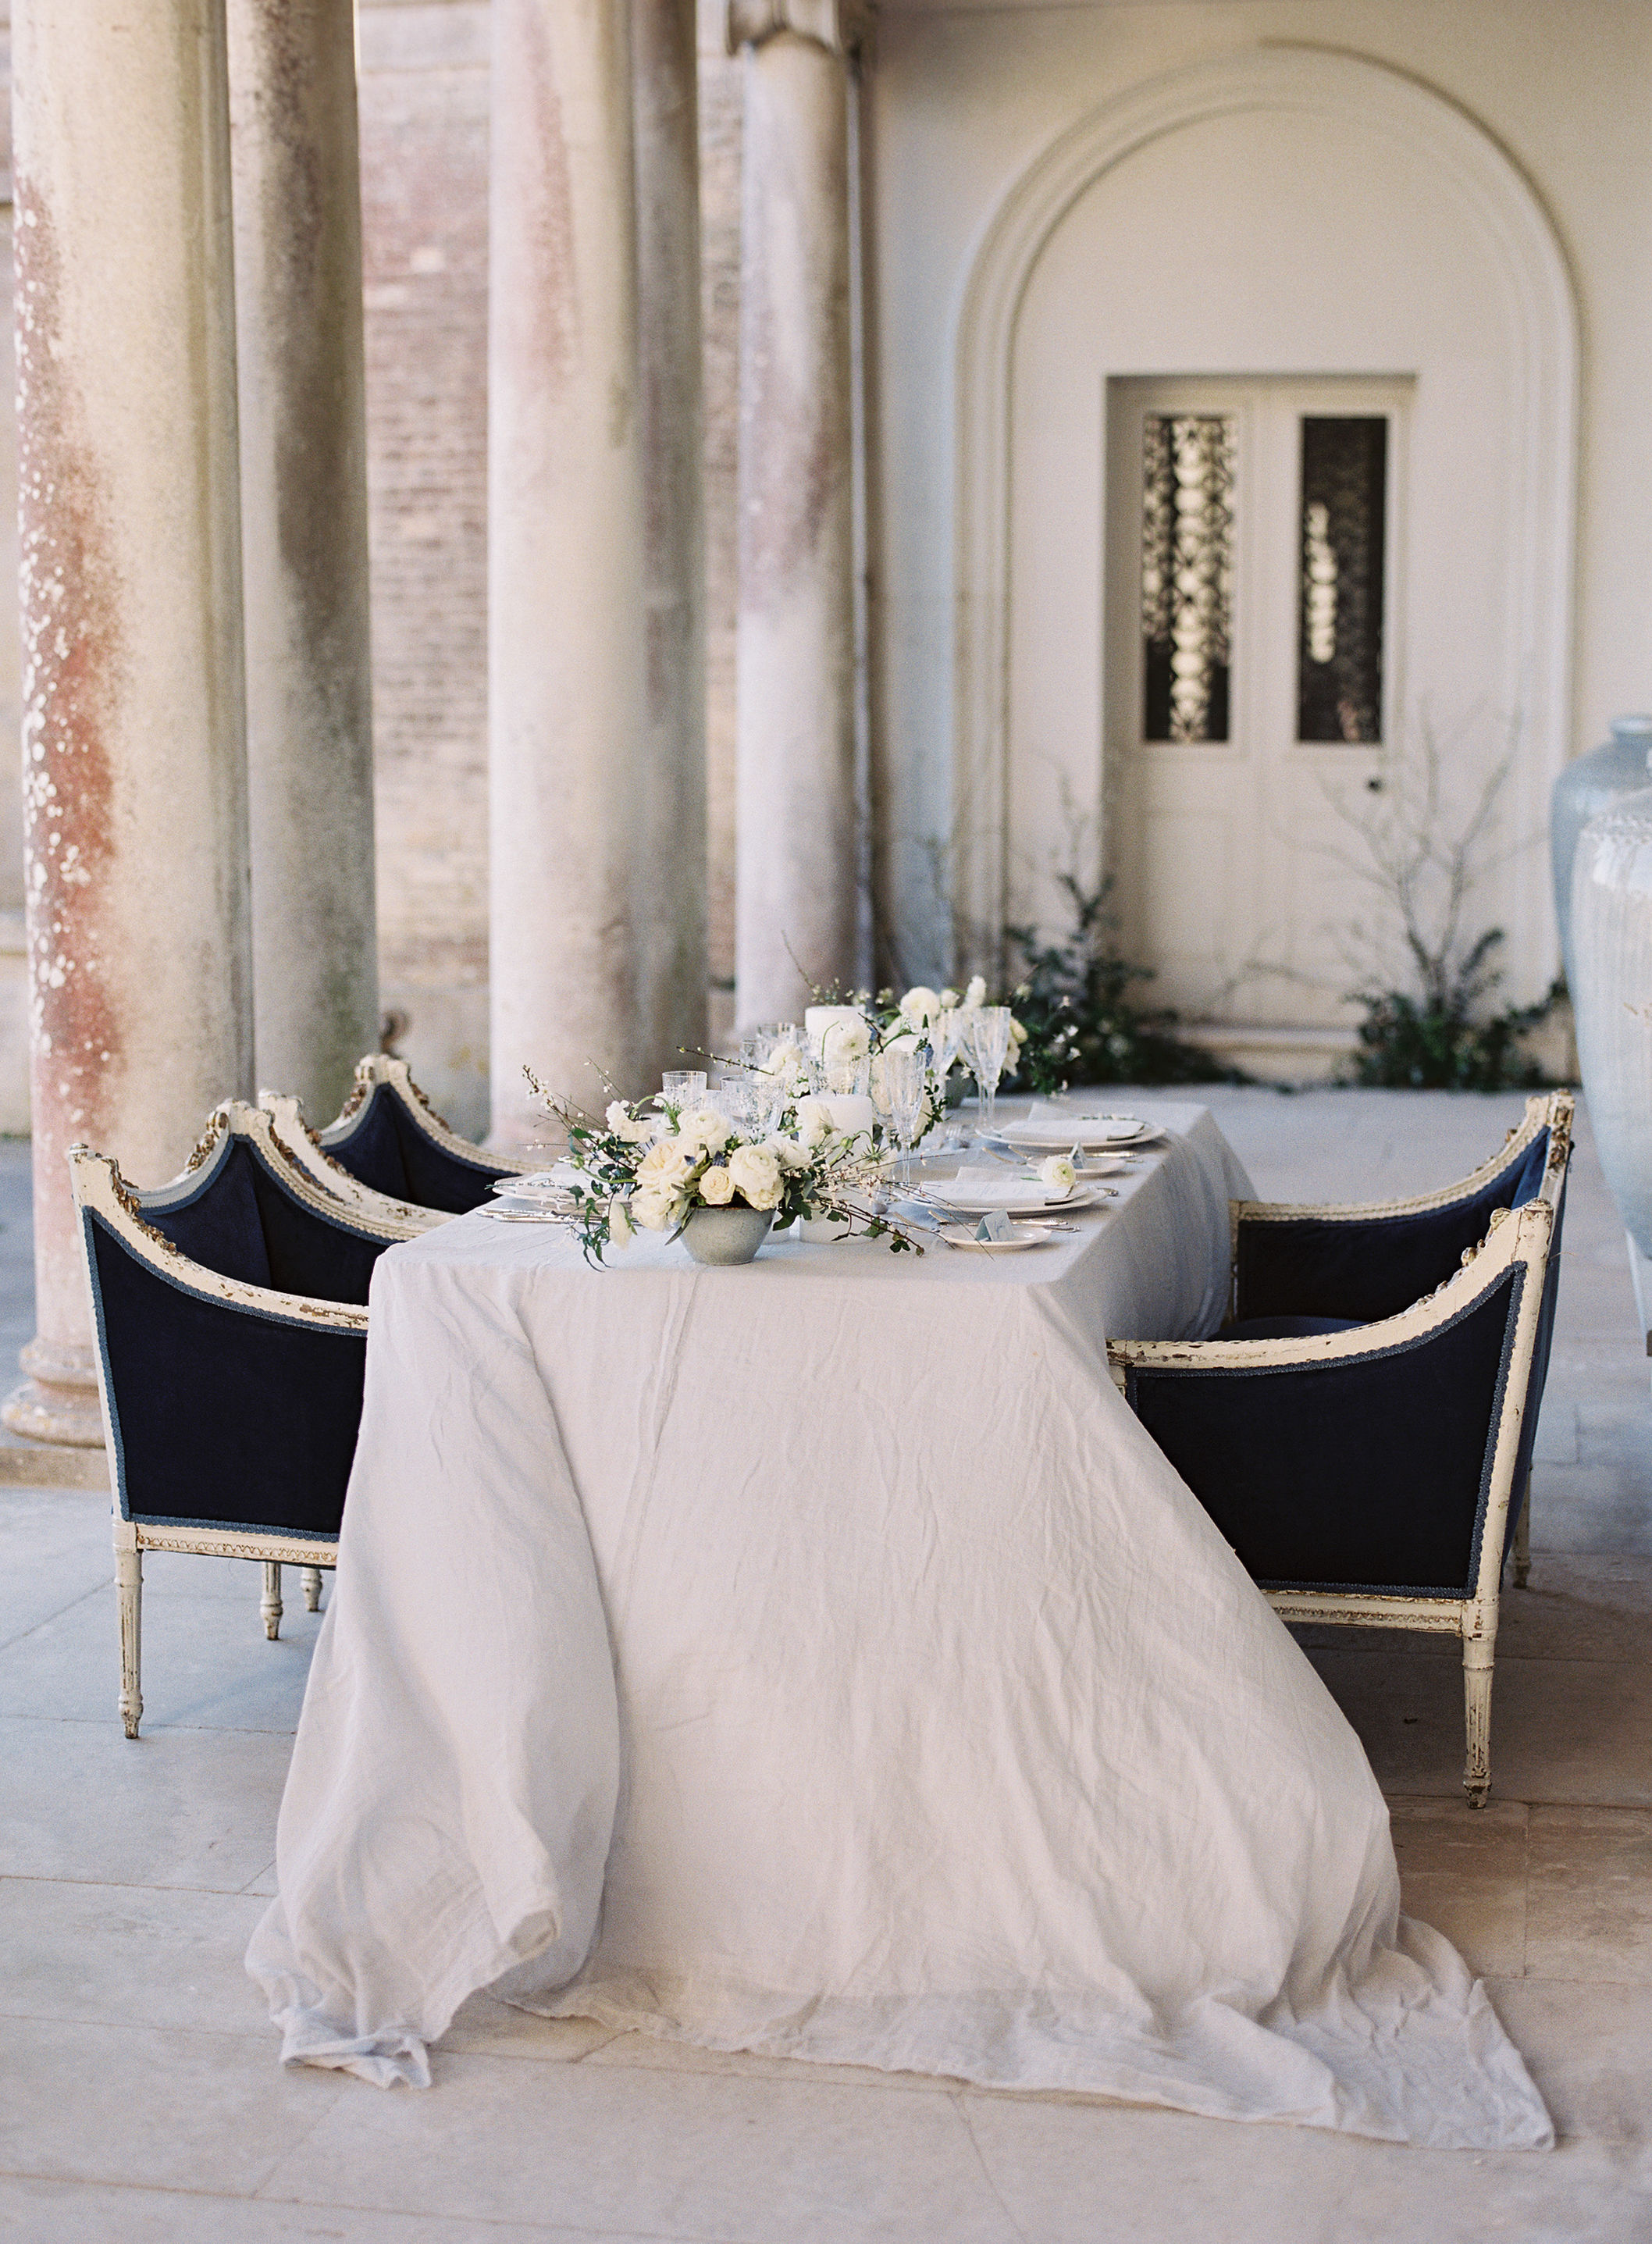 Romantic wedding table at Somerley House, Hampshire. Photo by Camilla Arnhold